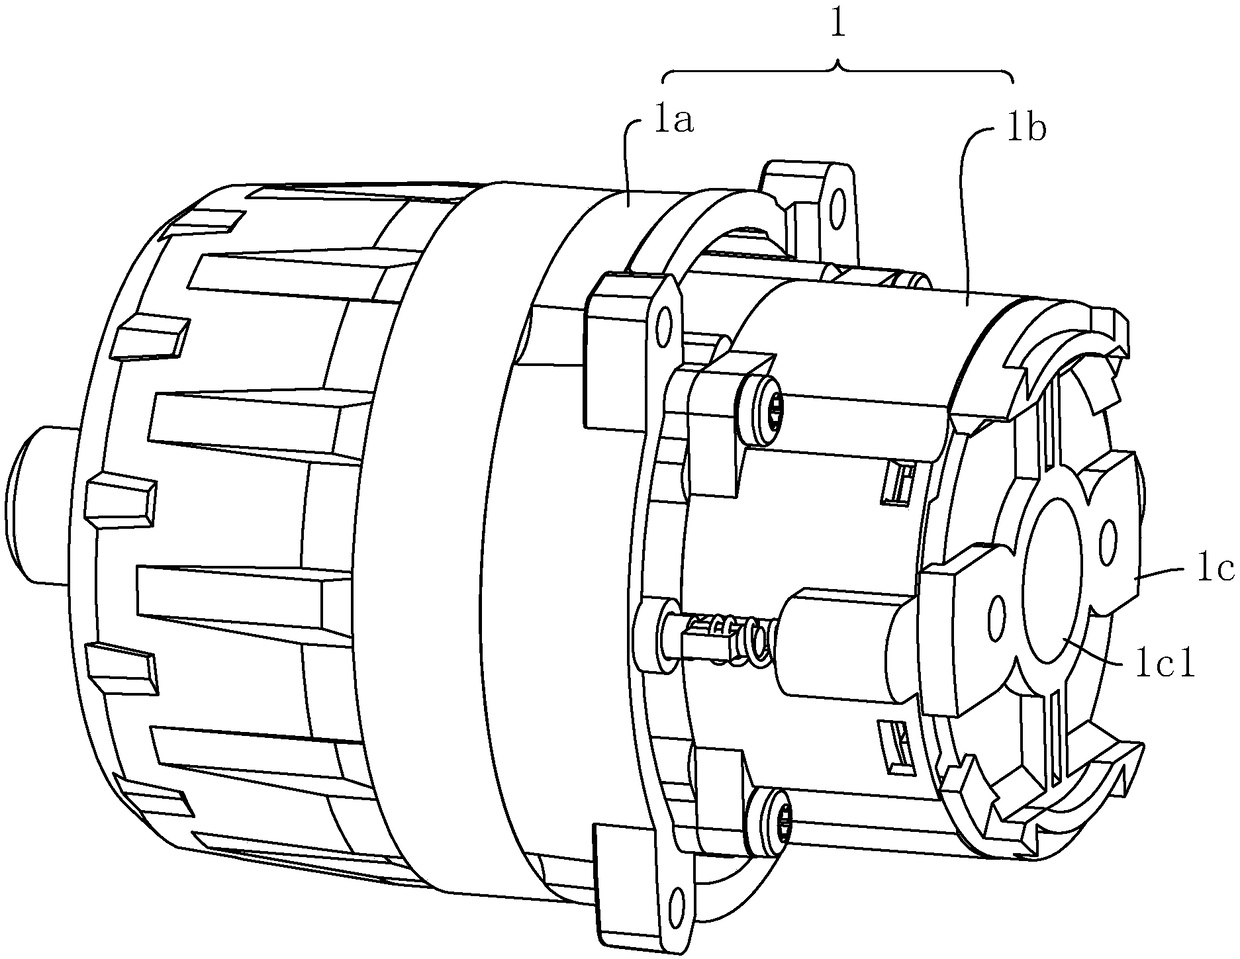 Gearbox and electric tool provided with same